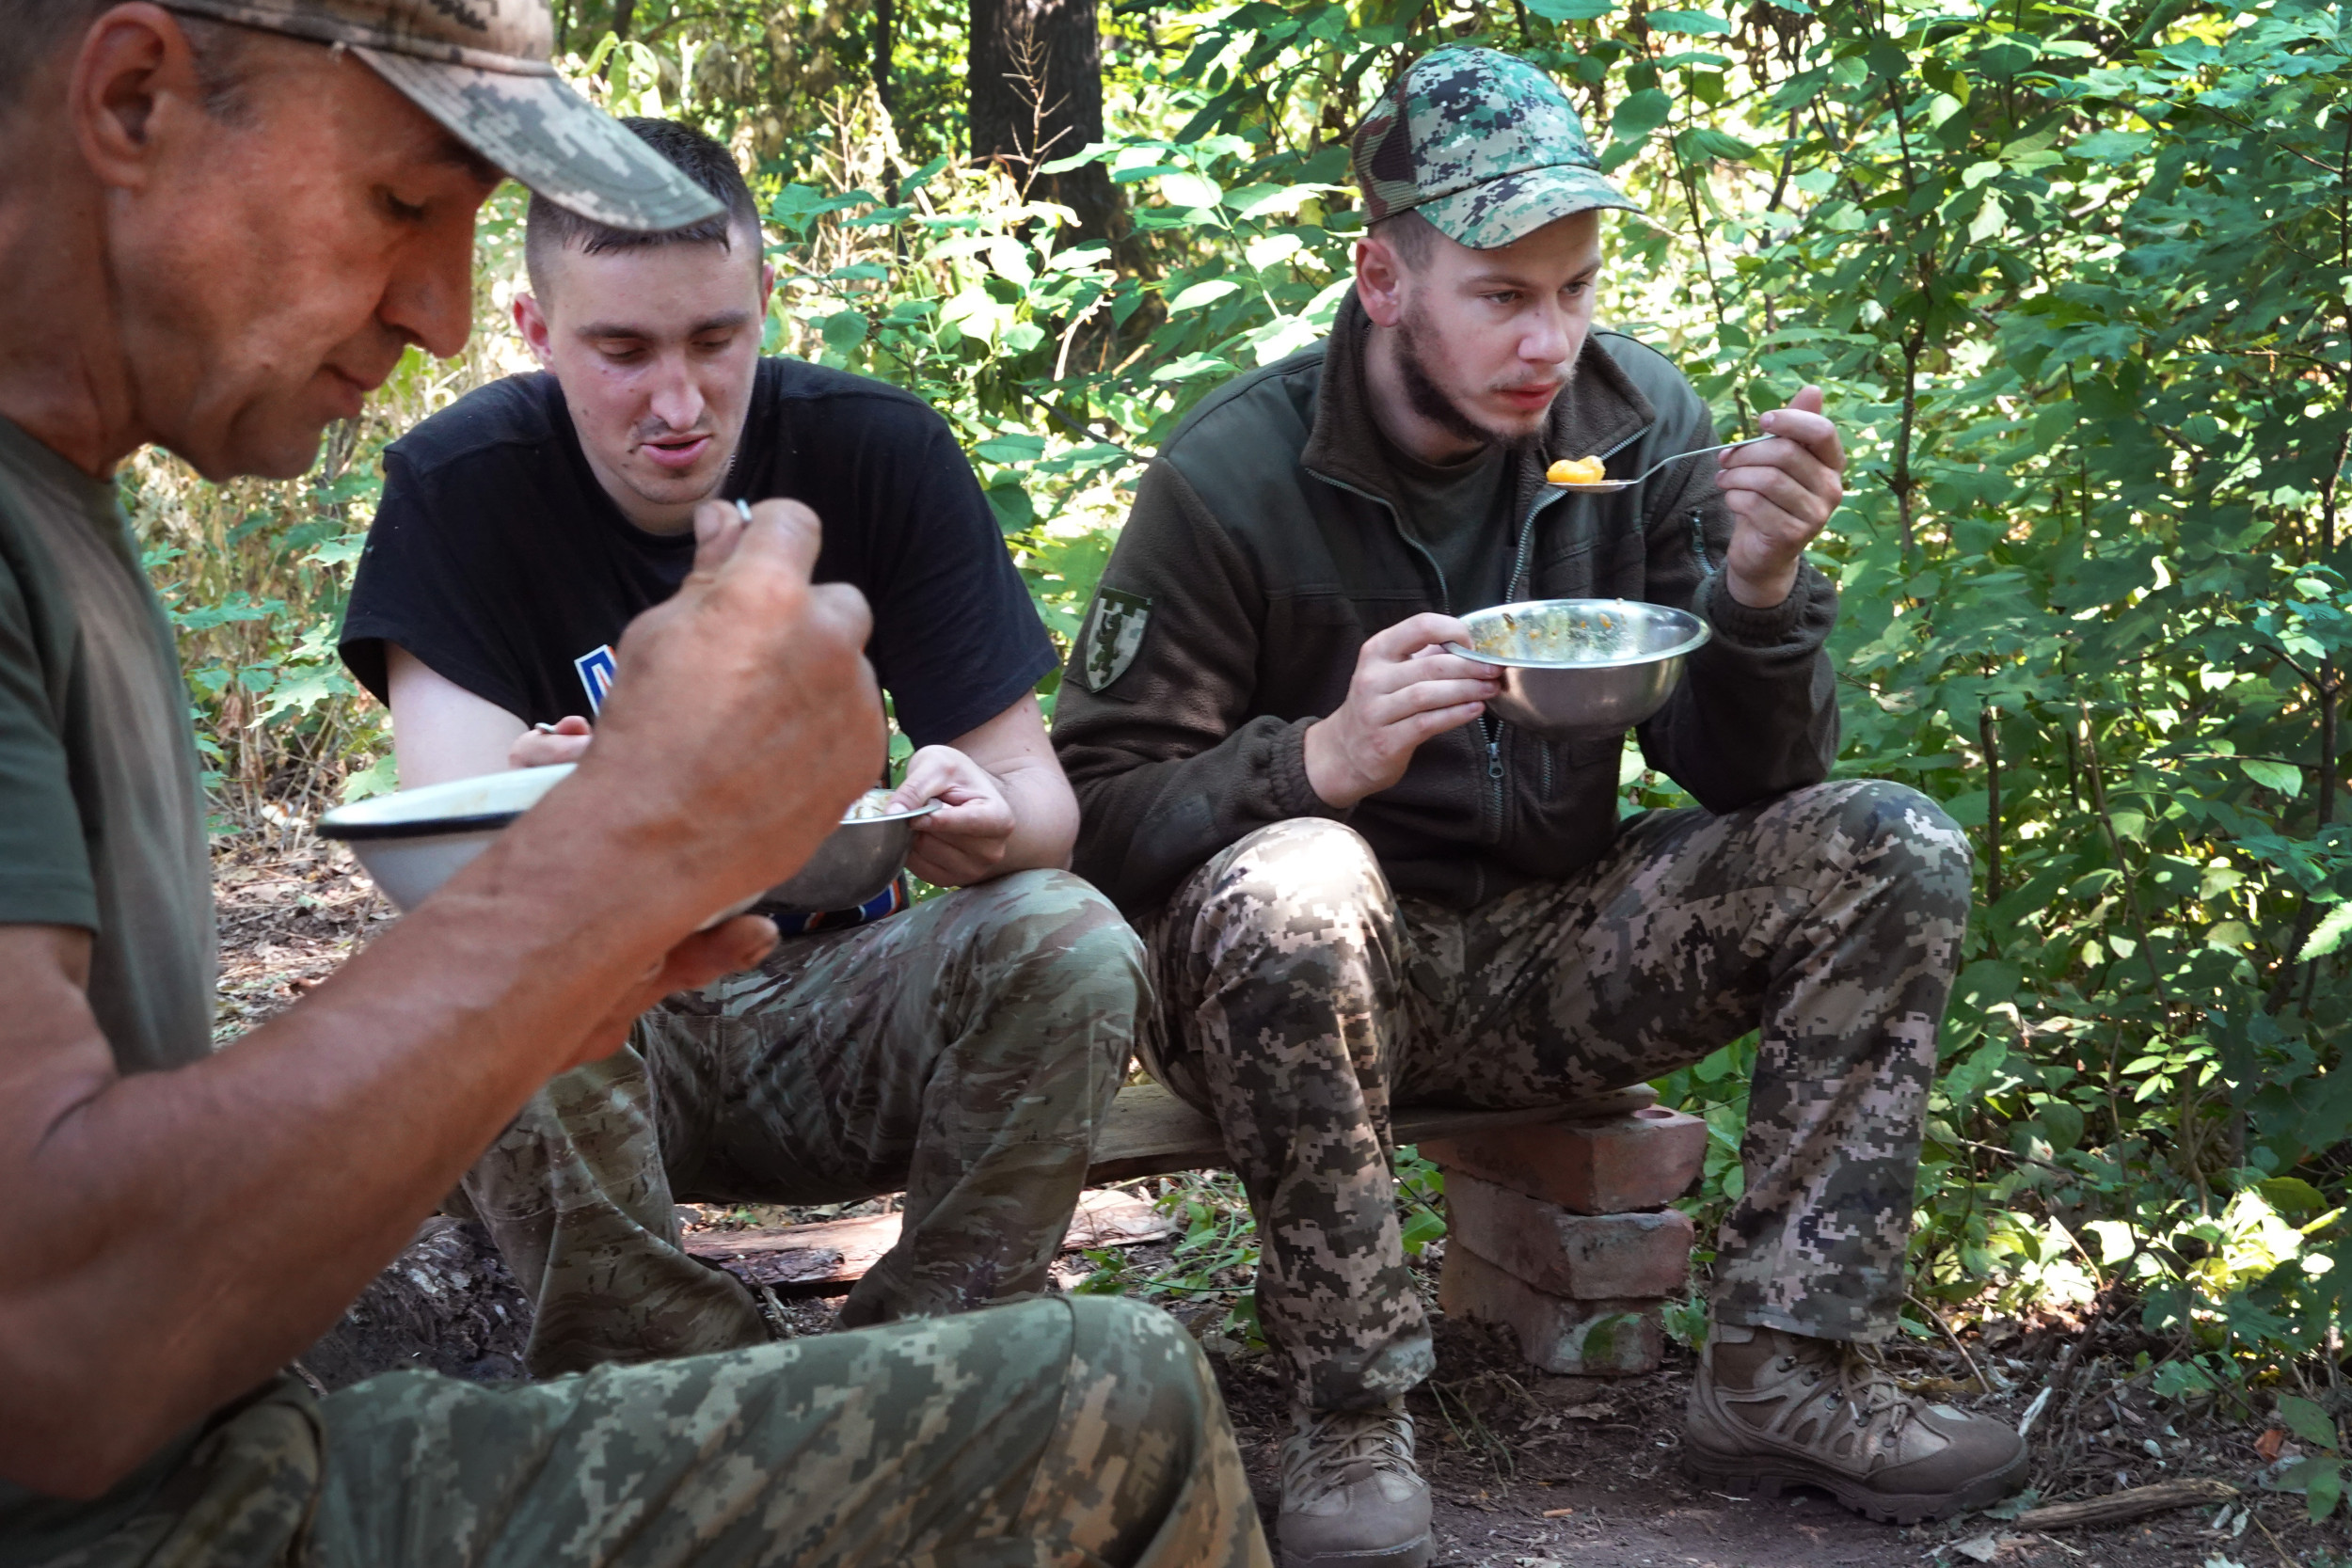 Ukraine Military Feasting on Meals Made by Cat Food Distributor